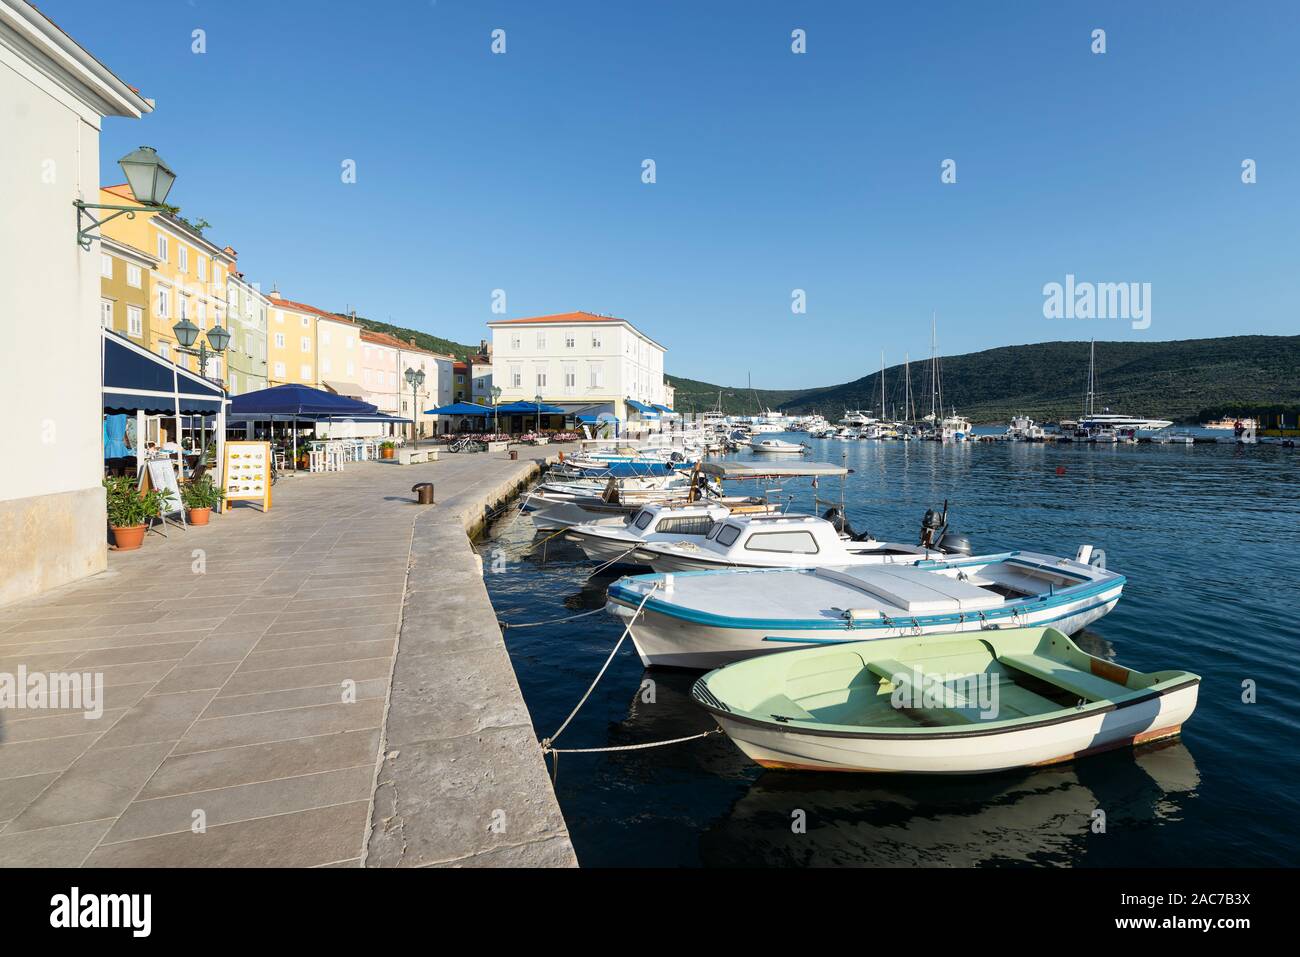 Motor boats, sailing boats and yachts in the harbor of the old town of Cres with cafes and restaurants in the evening sun, Cres, Kvarner Bay, Croatia Stock Photo